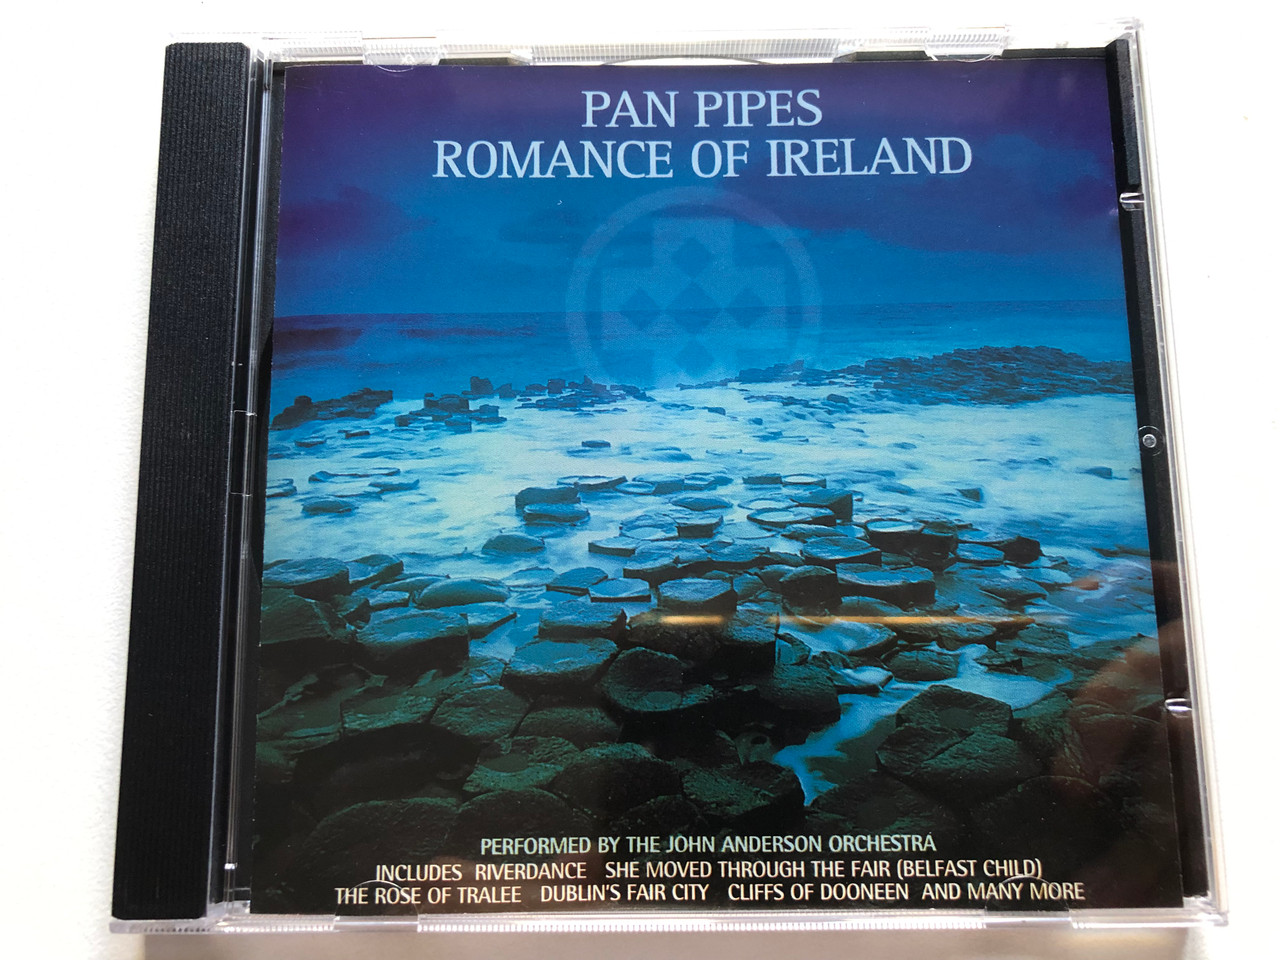 https://cdn10.bigcommerce.com/s-62bdpkt7pb/products/0/images/301723/Pan_Pipes_Romance_Of_Ireland_-_Performed_by_The_John_Anderson_Orchestra_Includes_Riverdance_She_Moved_Through_The_Fair_Belfast_Child_The_Rose_Of_Tralee_Dublins_Fair_Cry_Cliffs_Of_Doon_1__60460.1695804034.1280.1280.JPG?c=2&_gl=1*m76r84*_ga*MjA2NTIxMjE2MC4xNTkwNTEyNTMy*_ga_WS2VZYPC6G*MTY5NTgwMjg0MS4xMDczLjEuMTY5NTgwMzY3OS41OS4wLjA.